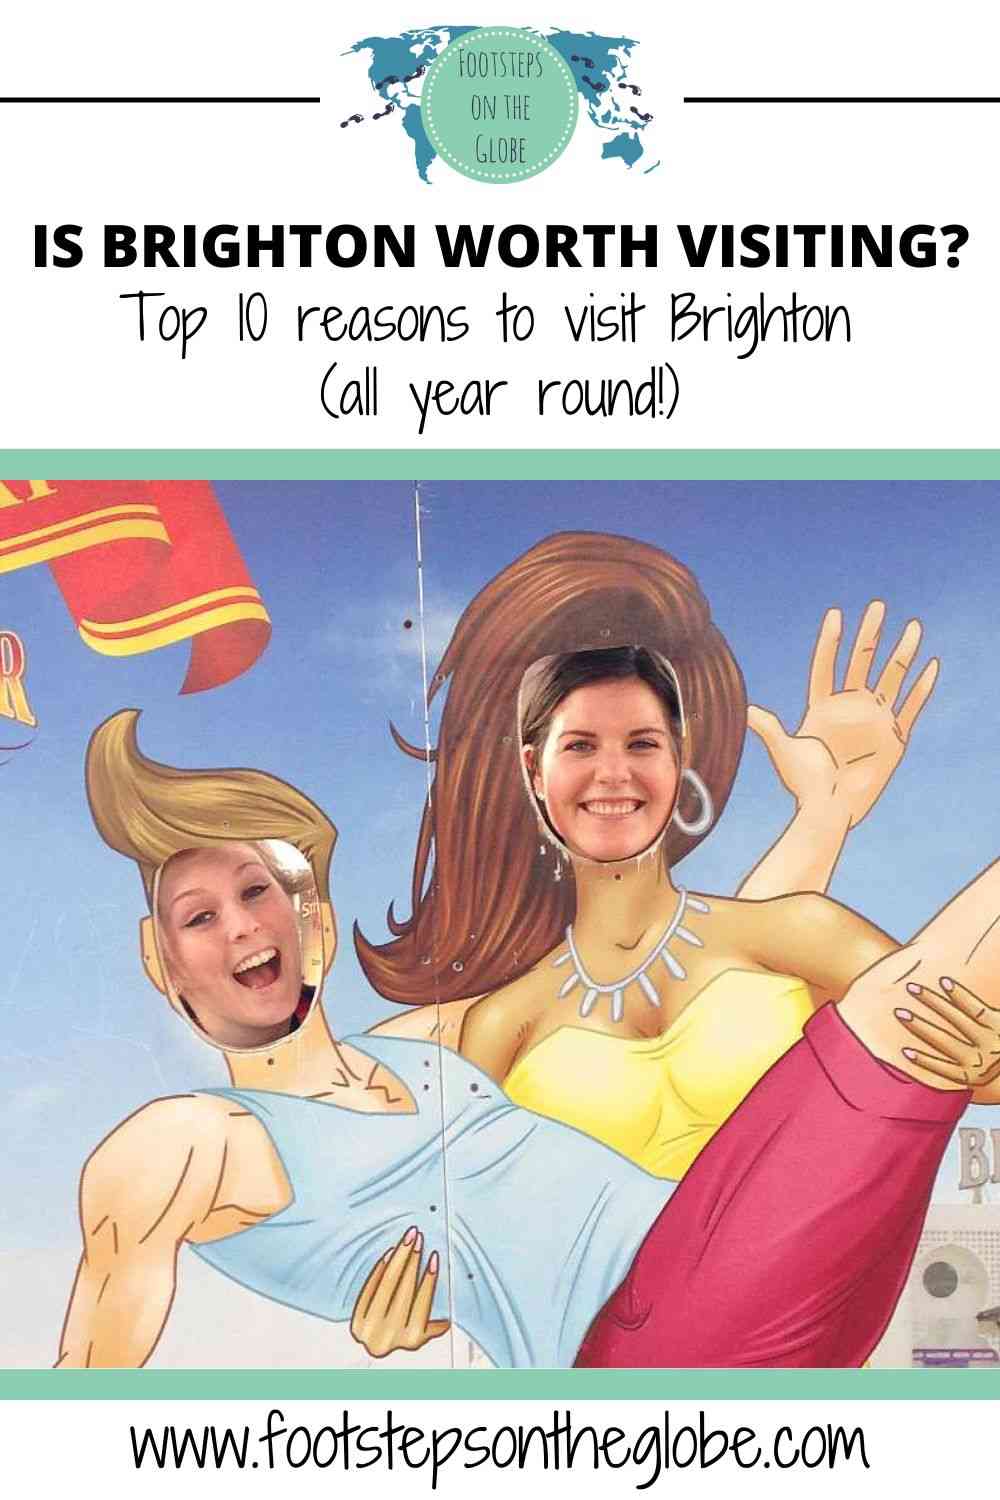 Pinterest image with the text: "Is Brighton worth visiting? Top 10 reasons to visit Brighton (all year round!)" with a photo of two friends with their faces in a cut out board with a couple